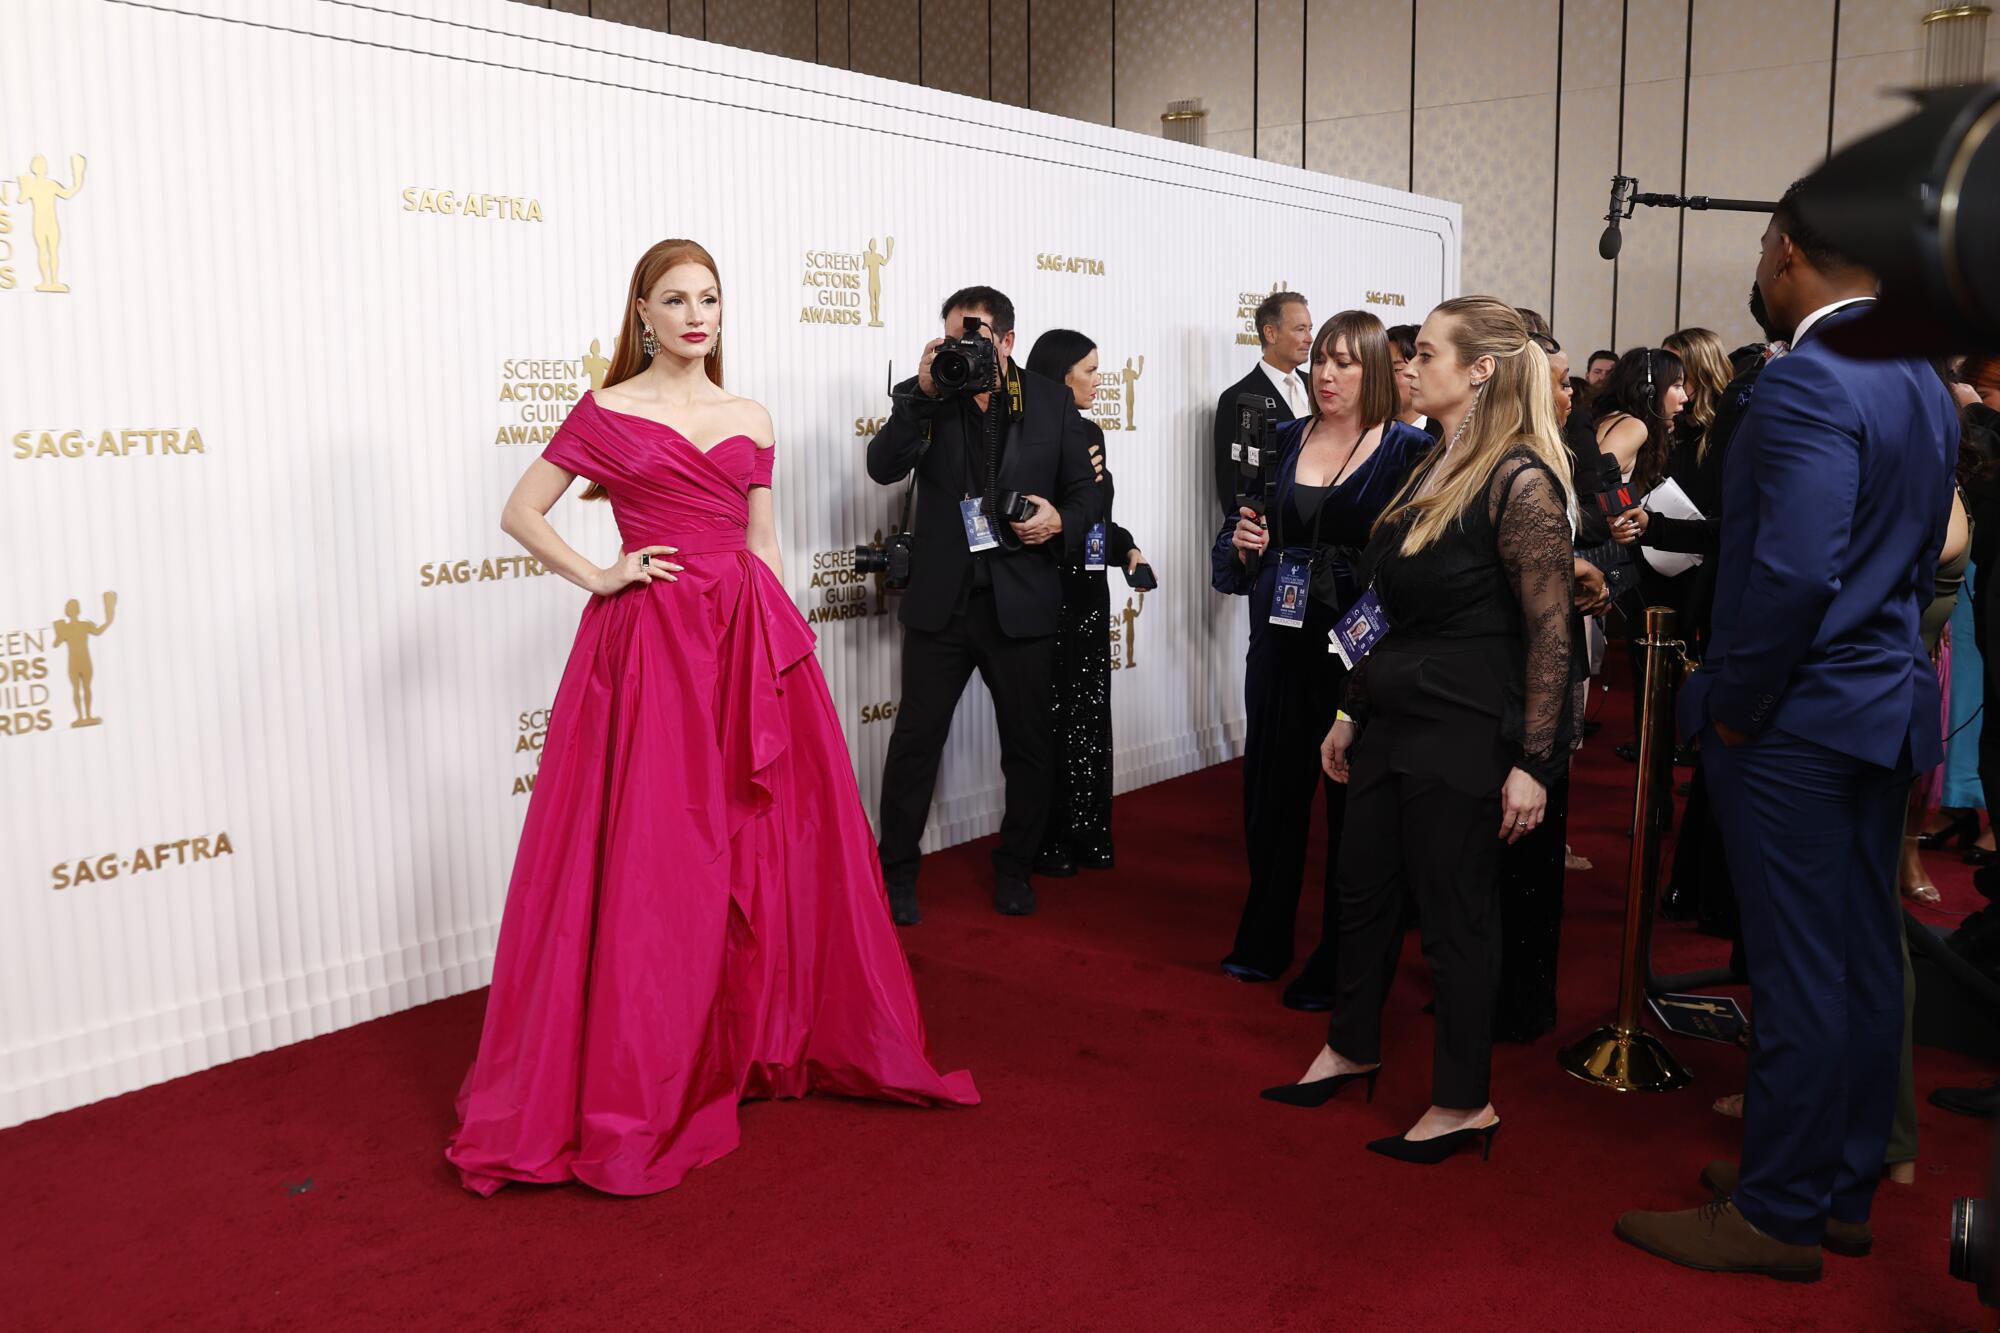 Best red dress moments on the red carpet, Gallery